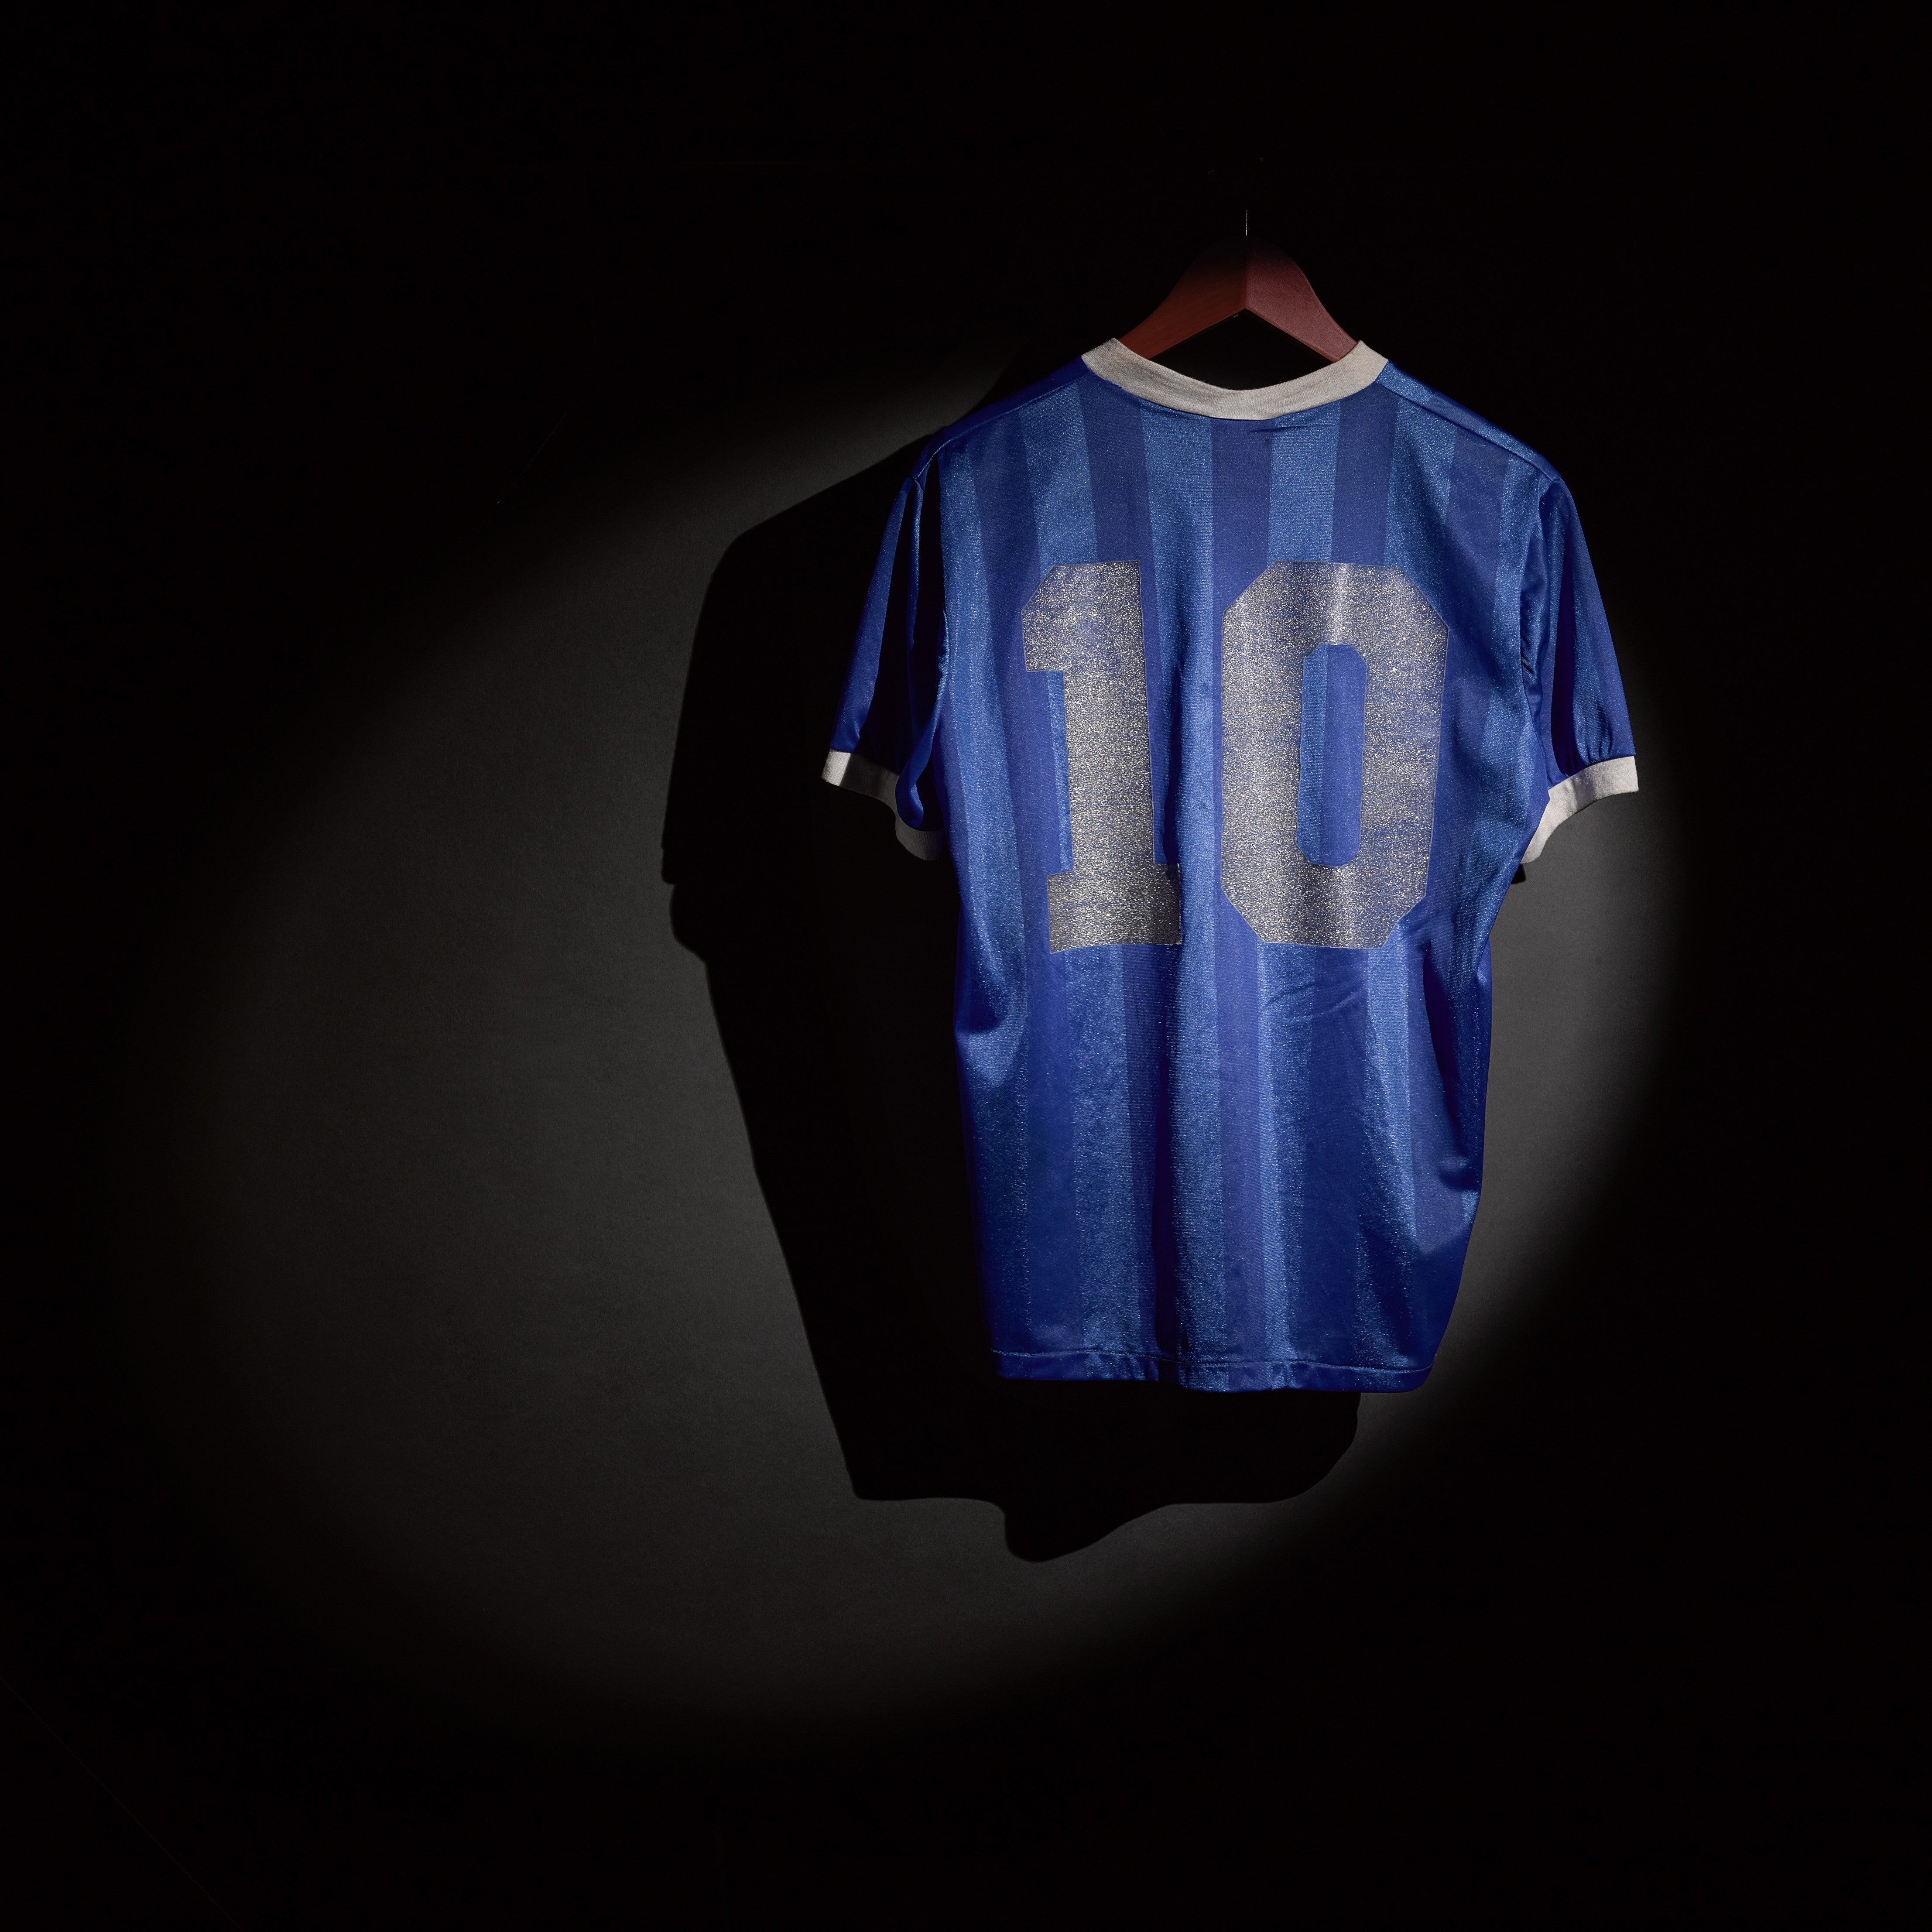 Diego Maradona’s Hand of God shirt is going up for action and could sell for as much as £4m (Sotheby’s/PA)